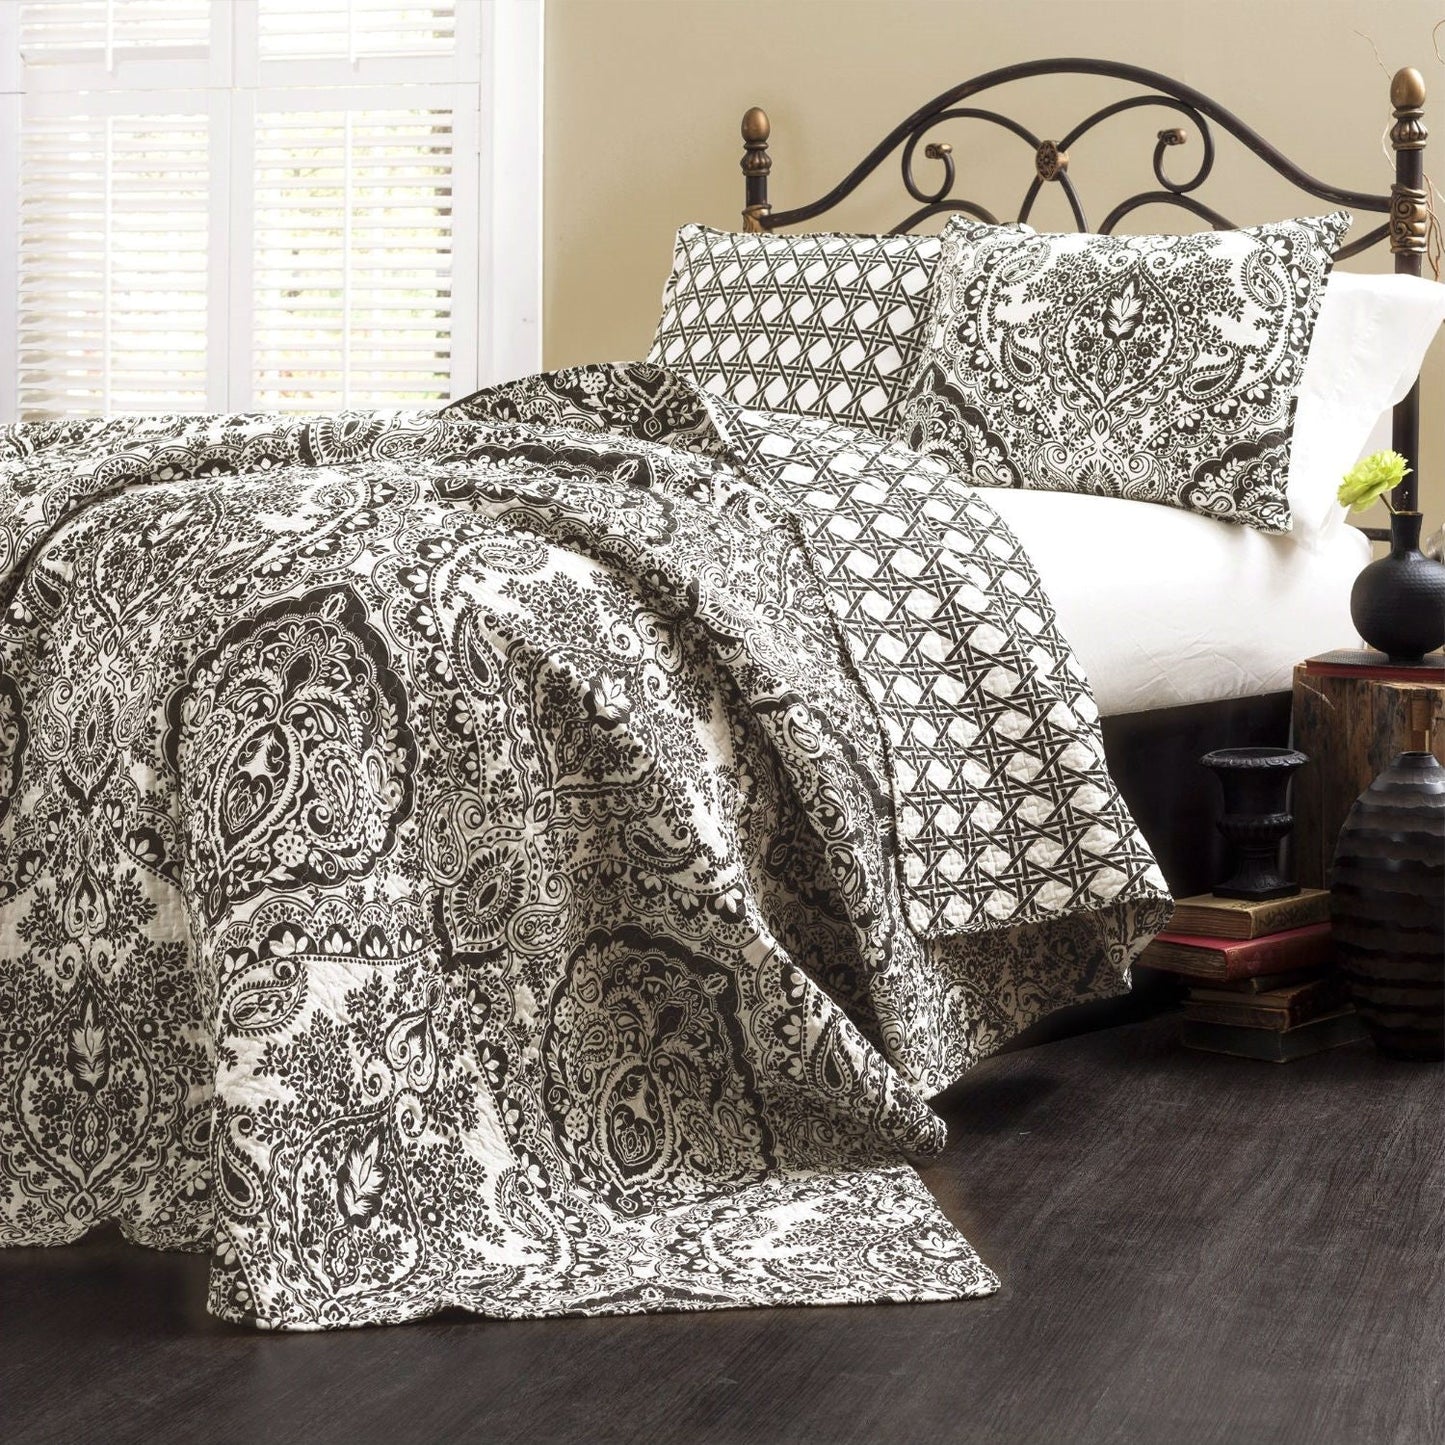 Bedroom > Quilts & Blankets - Queen Size 3-Piece Quilt Set 100-Percent Cotton In Charcoal Damask